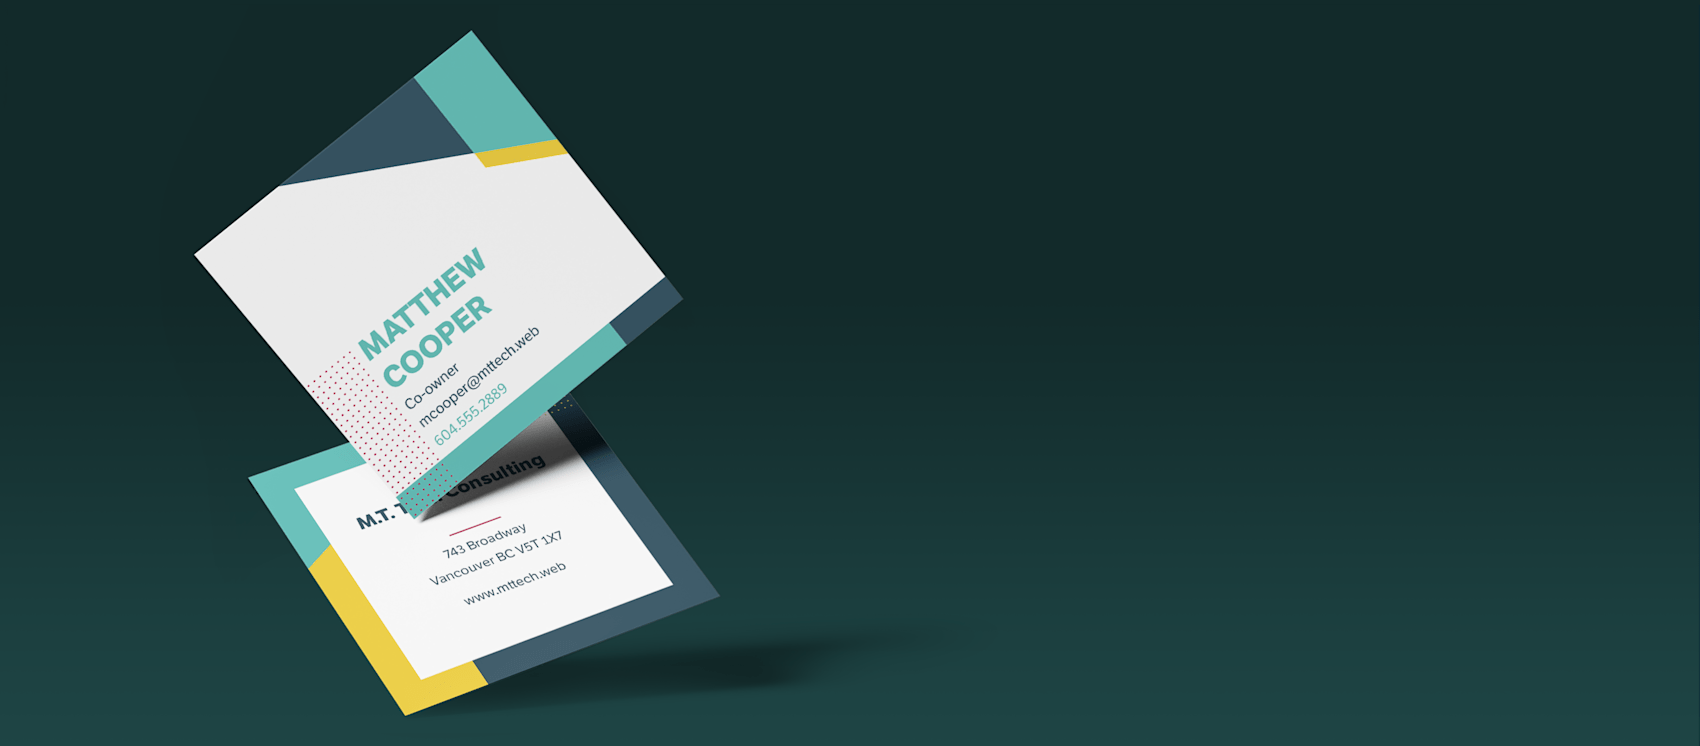 Larger version: Square business cards